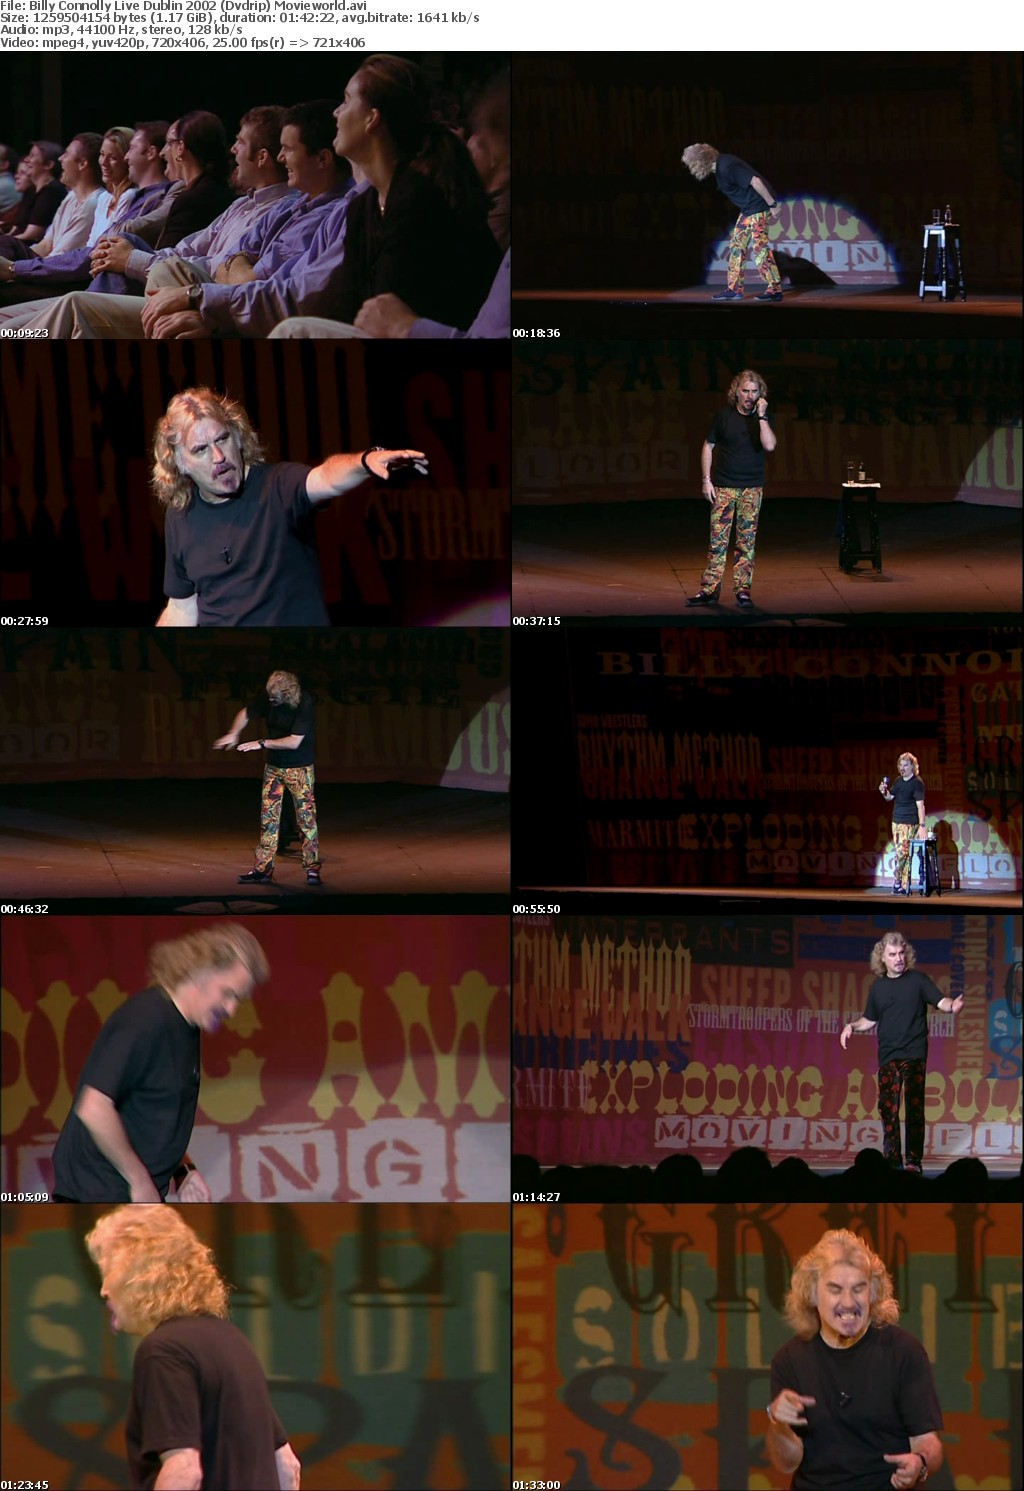 Billy Connolly Live Dublin 2002 (Dvdrip) Movieworld